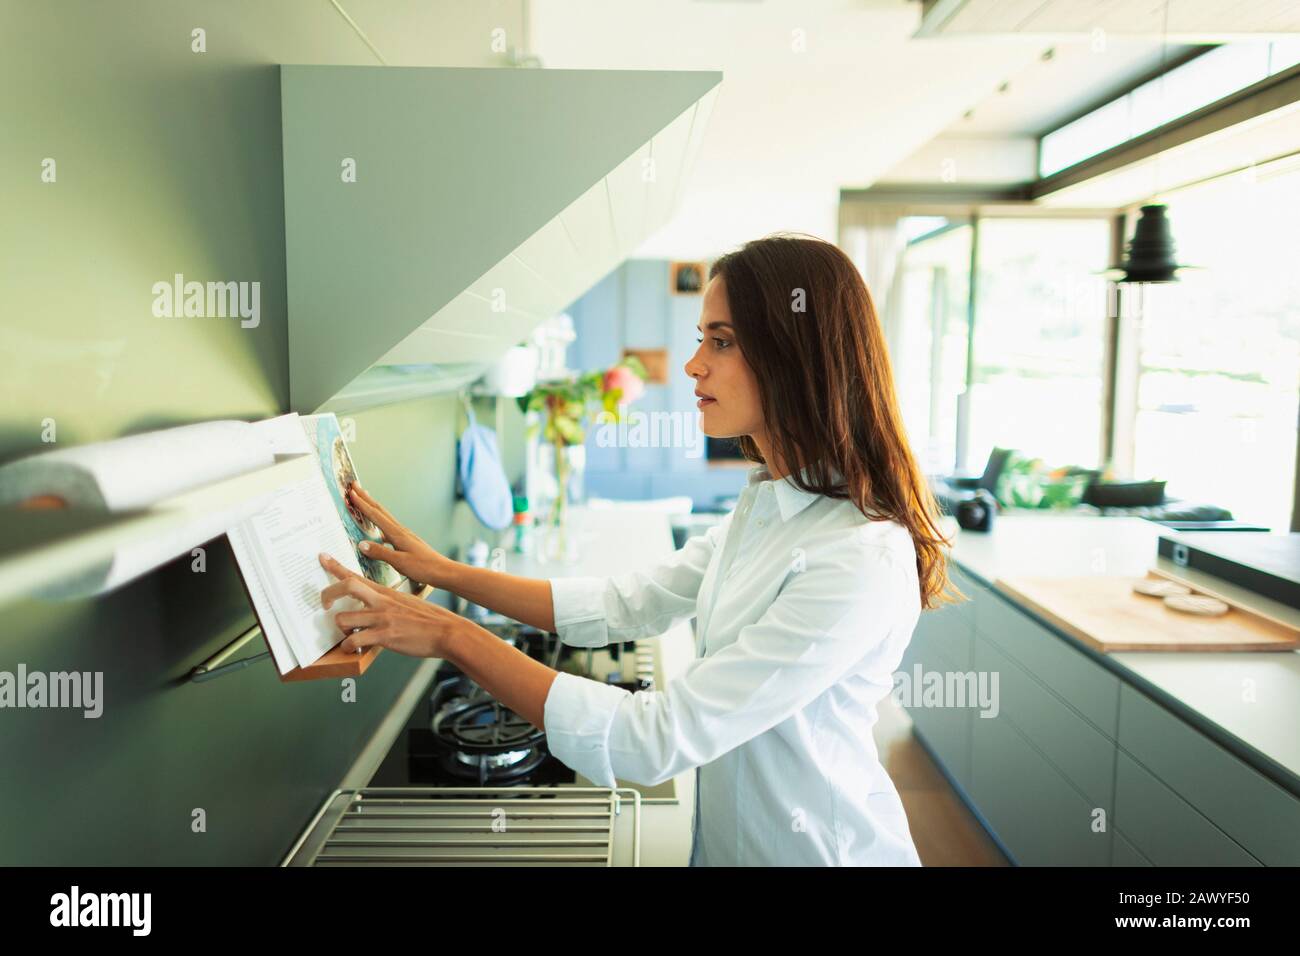 Woman checking recipe in cookbook, cooking in modern kitchen Stock Photo